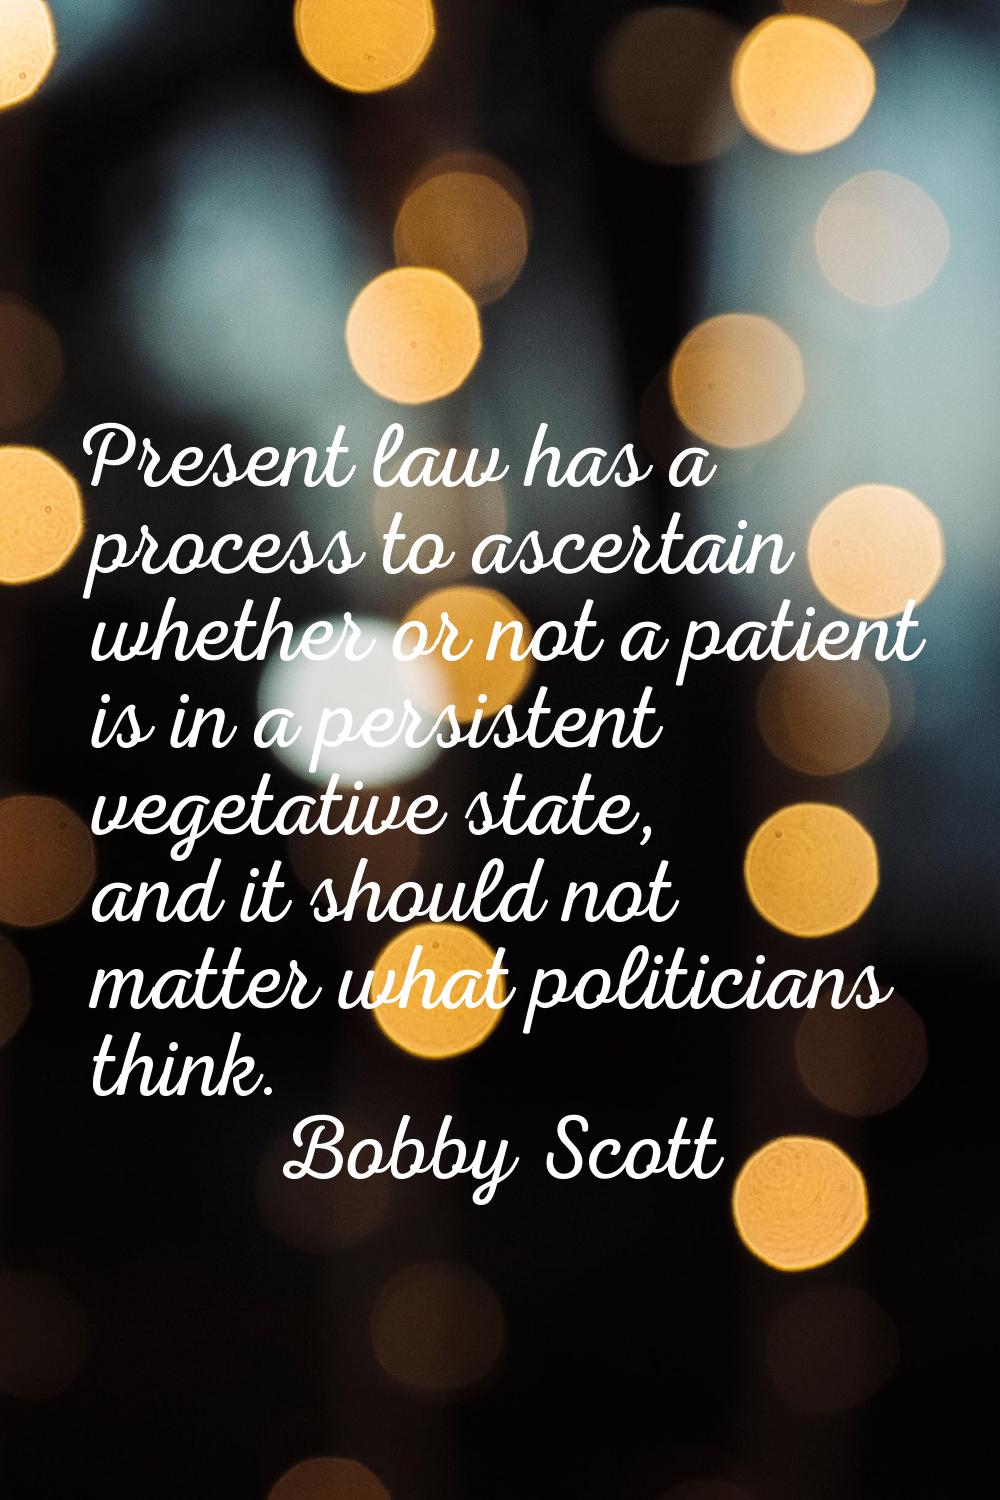 Present law has a process to ascertain whether or not a patient is in a persistent vegetative state